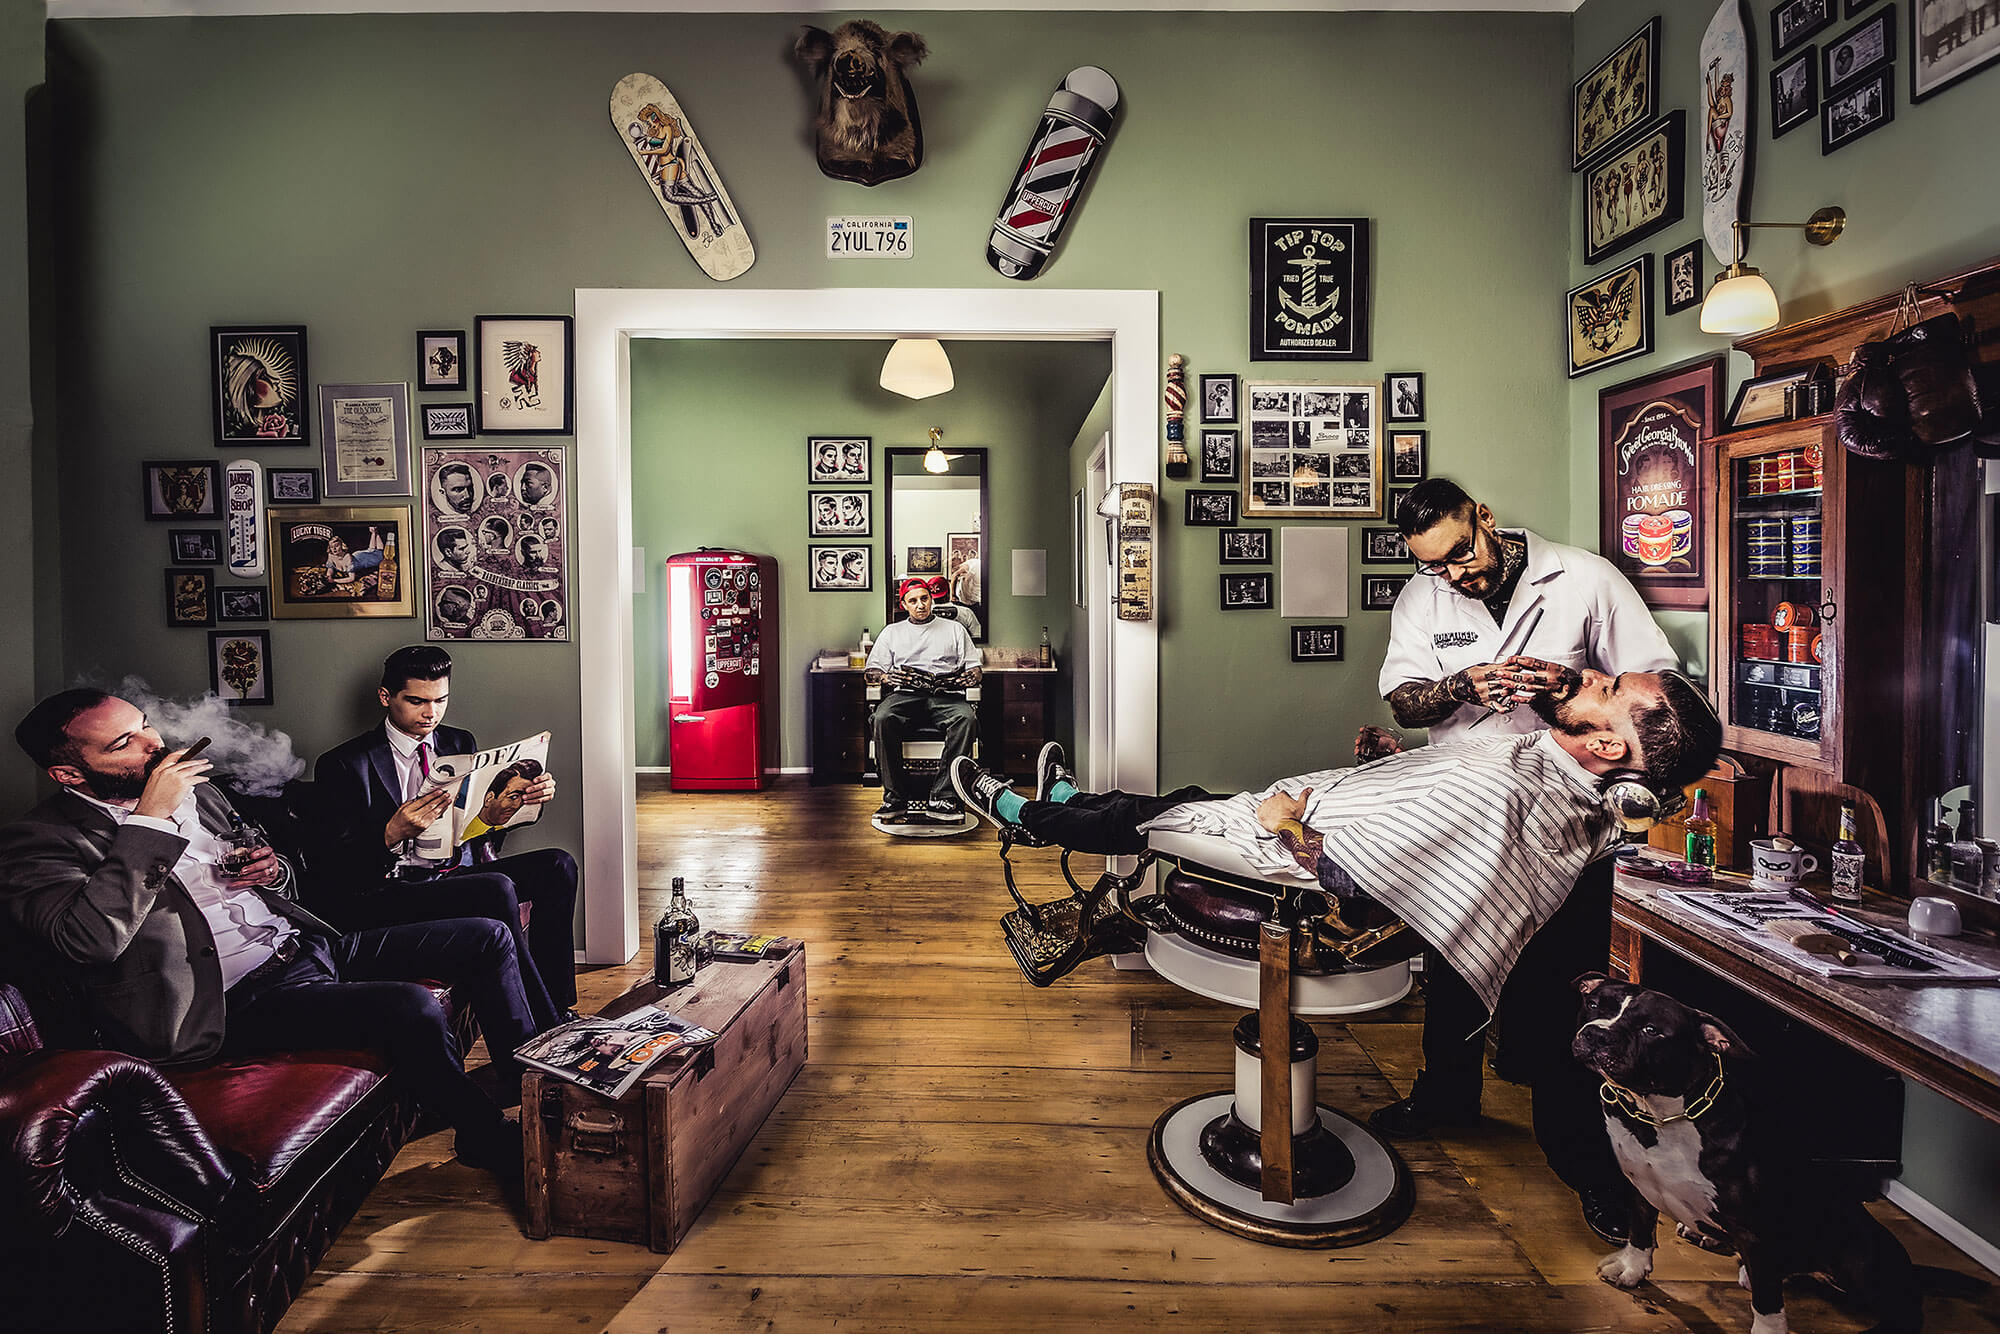 Barbershops and Tatted Limbs; Tattoos and a Good Shave | MediaZink